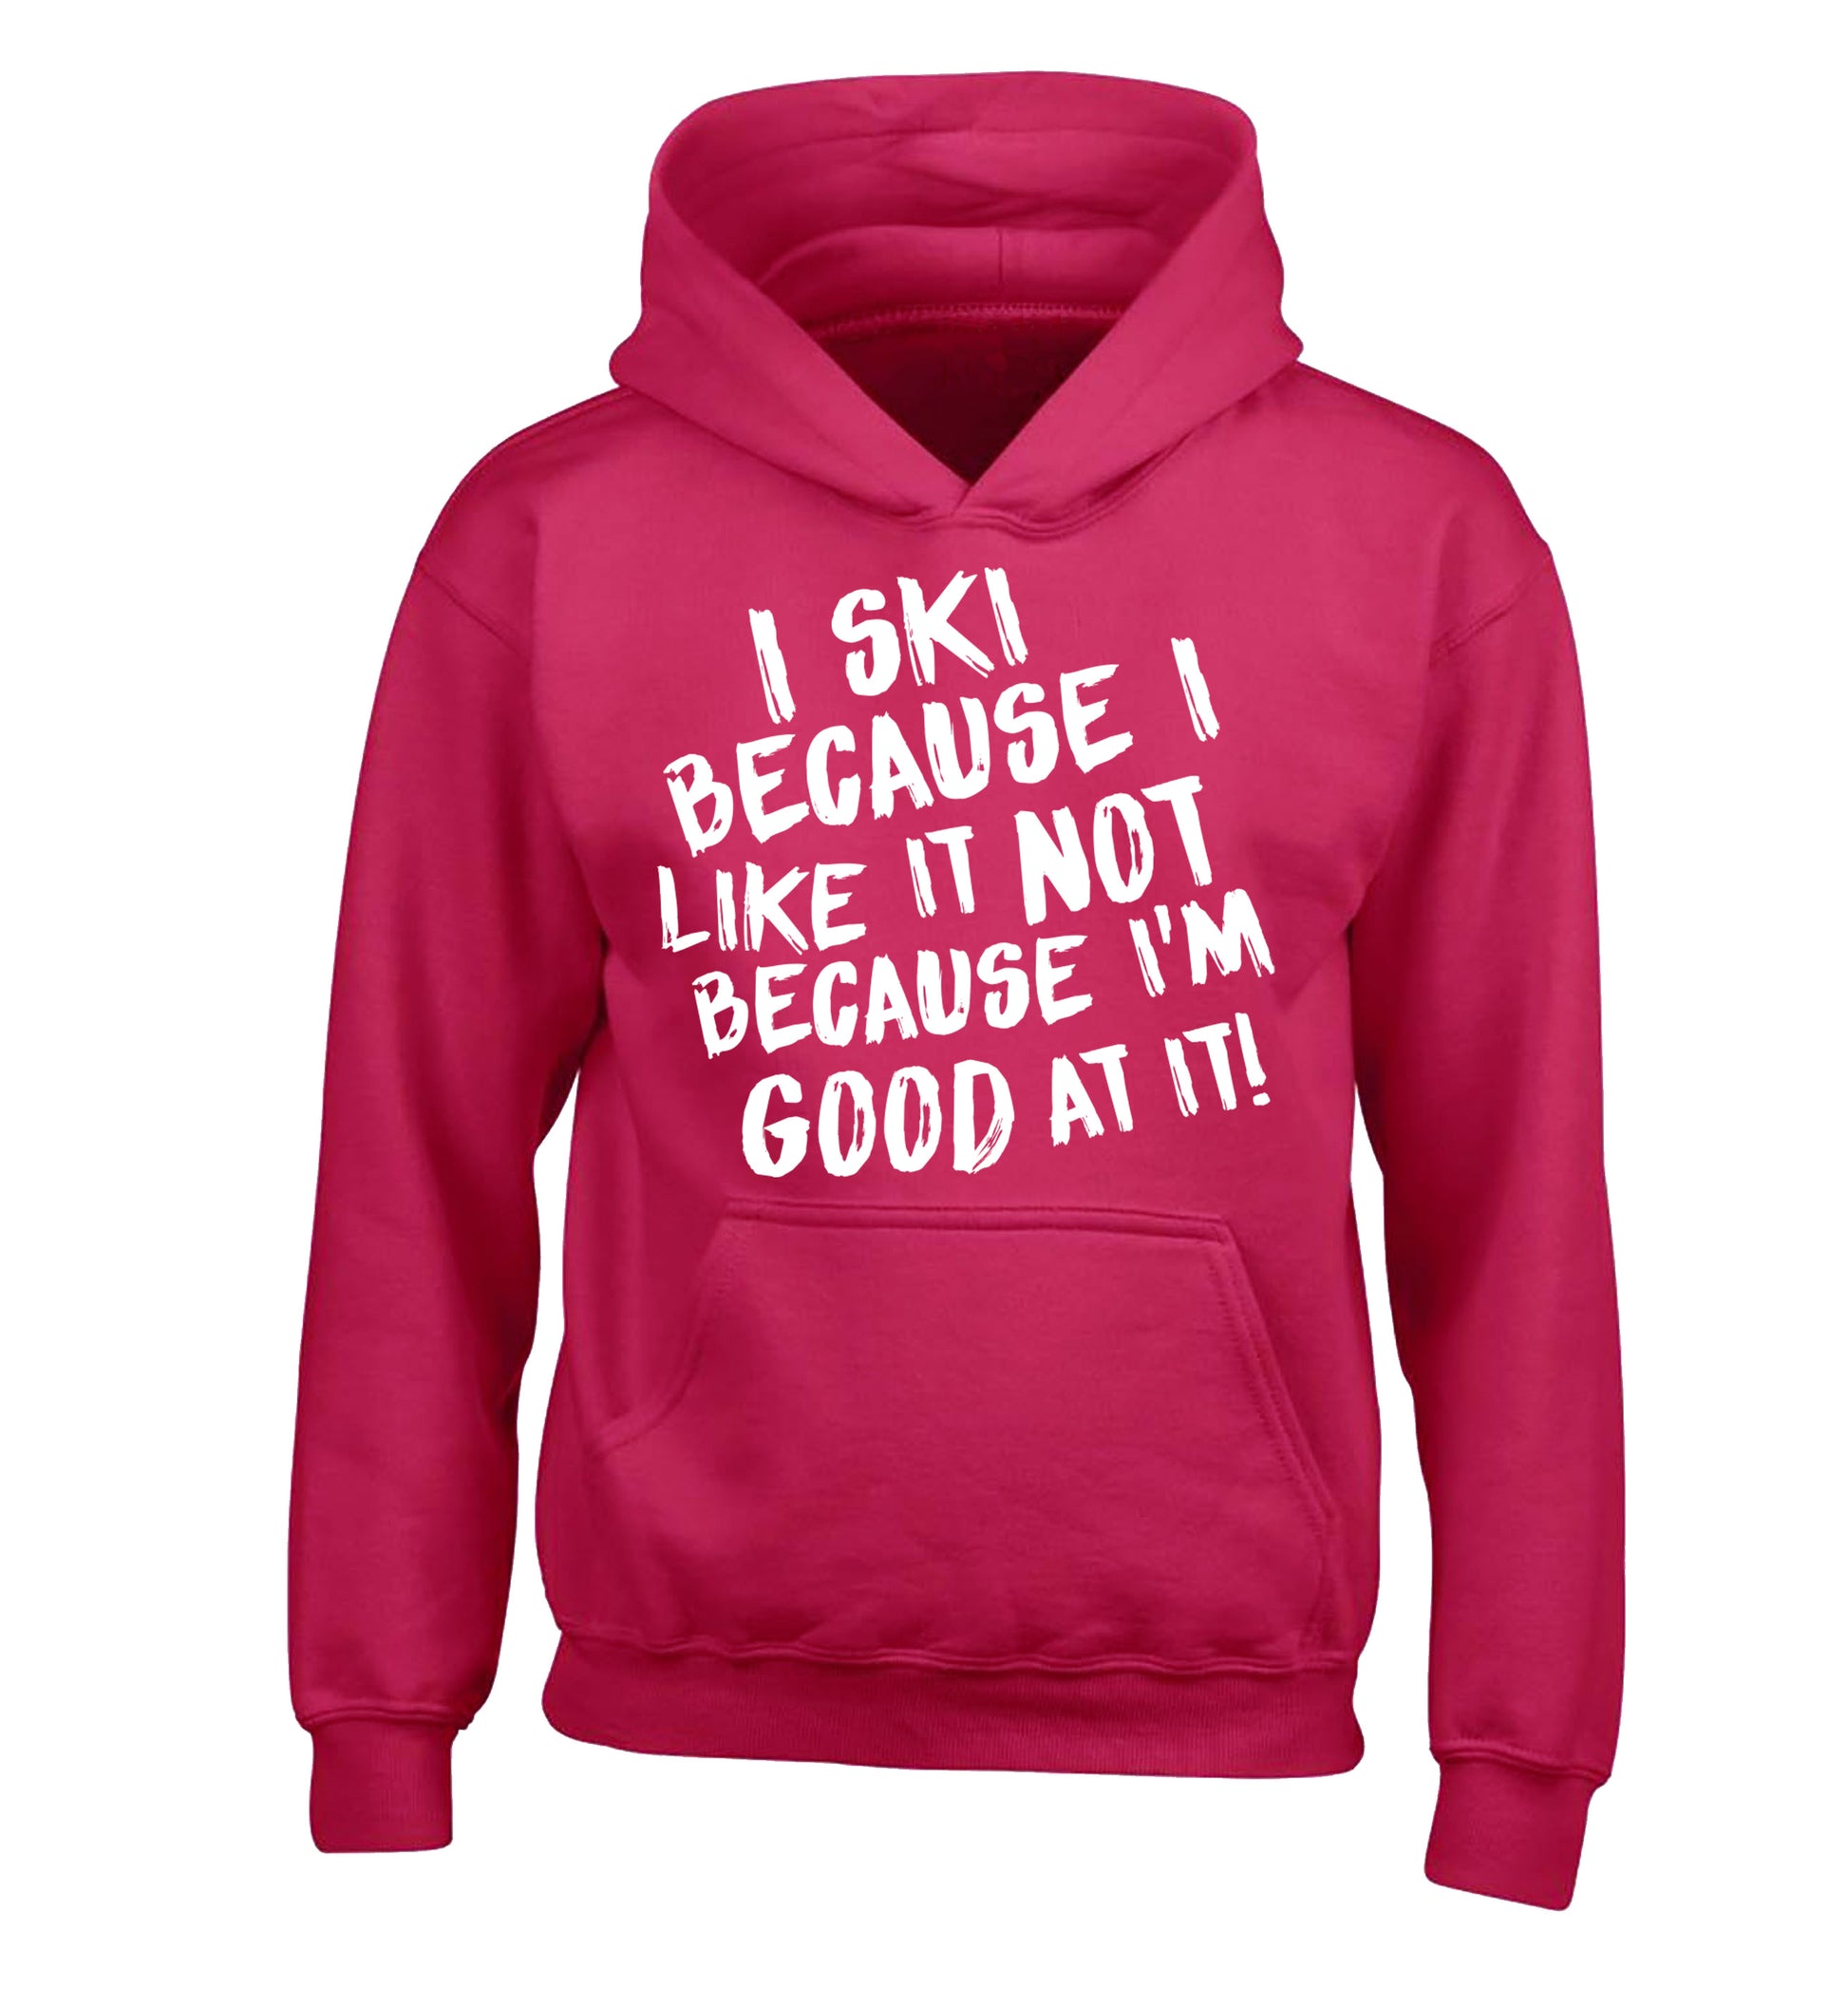 I ski because I like it not because I'm good at it children's pink hoodie 12-14 Years